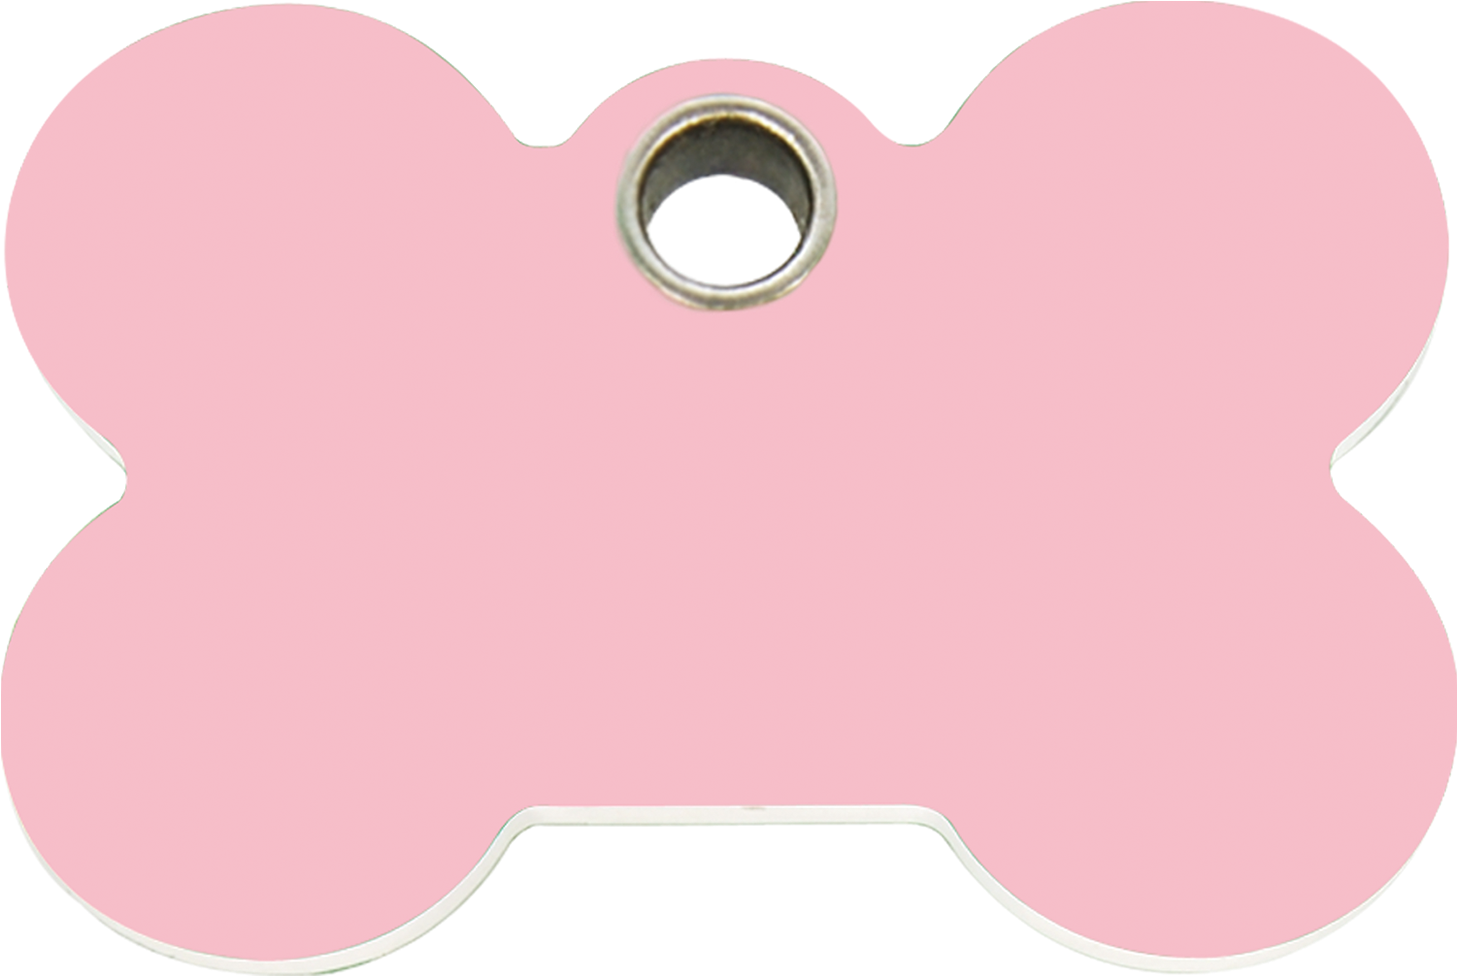 A Pink Bone Shaped Object With A Hole In The Middle